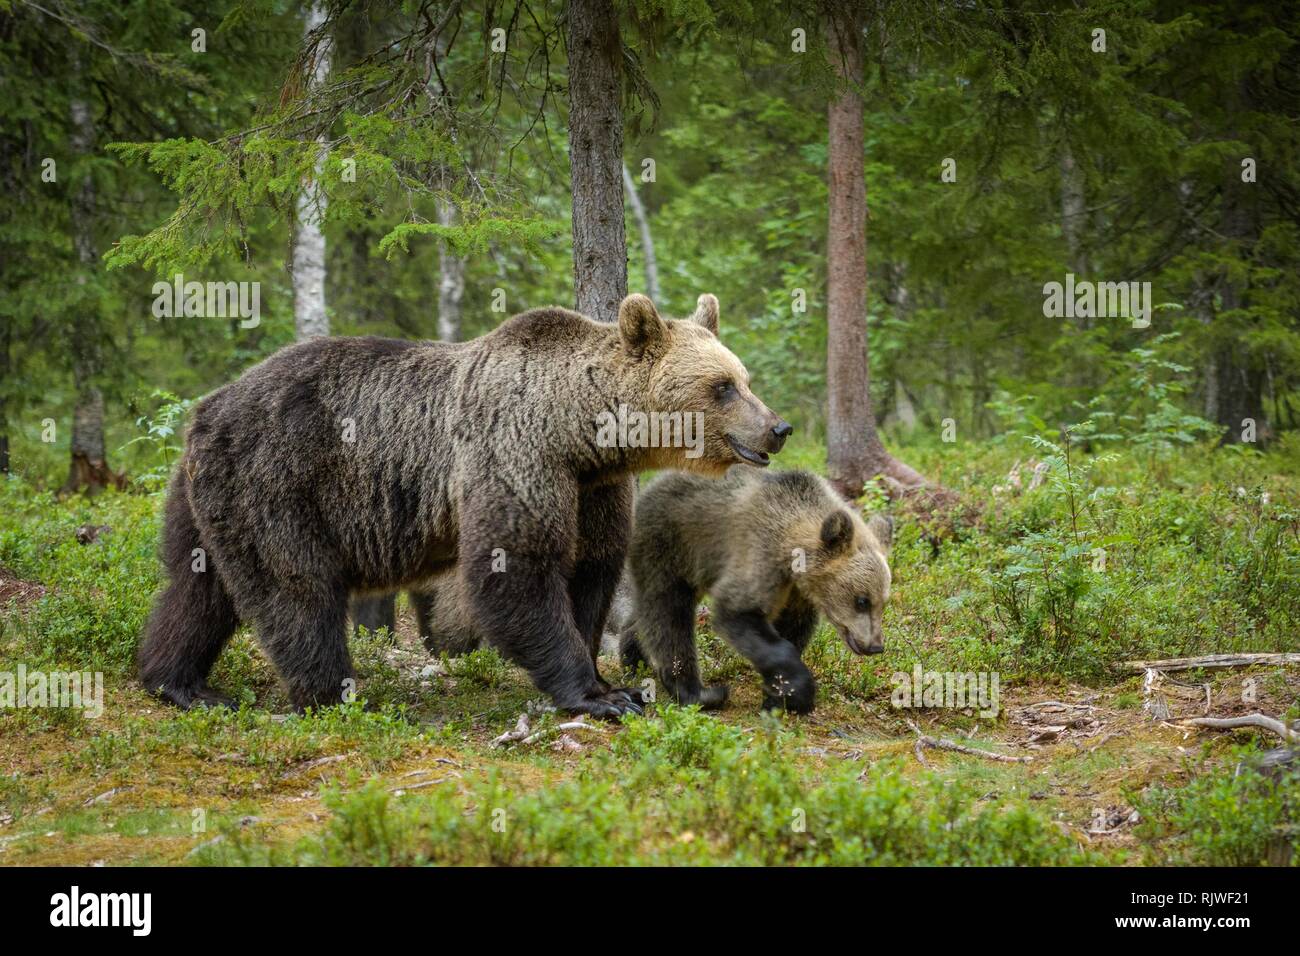 European brown bear (Ursus arctos arctos), mother animal with a young animal running in the forest, Suomussalmi, Kainuu, Finland Stock Photo